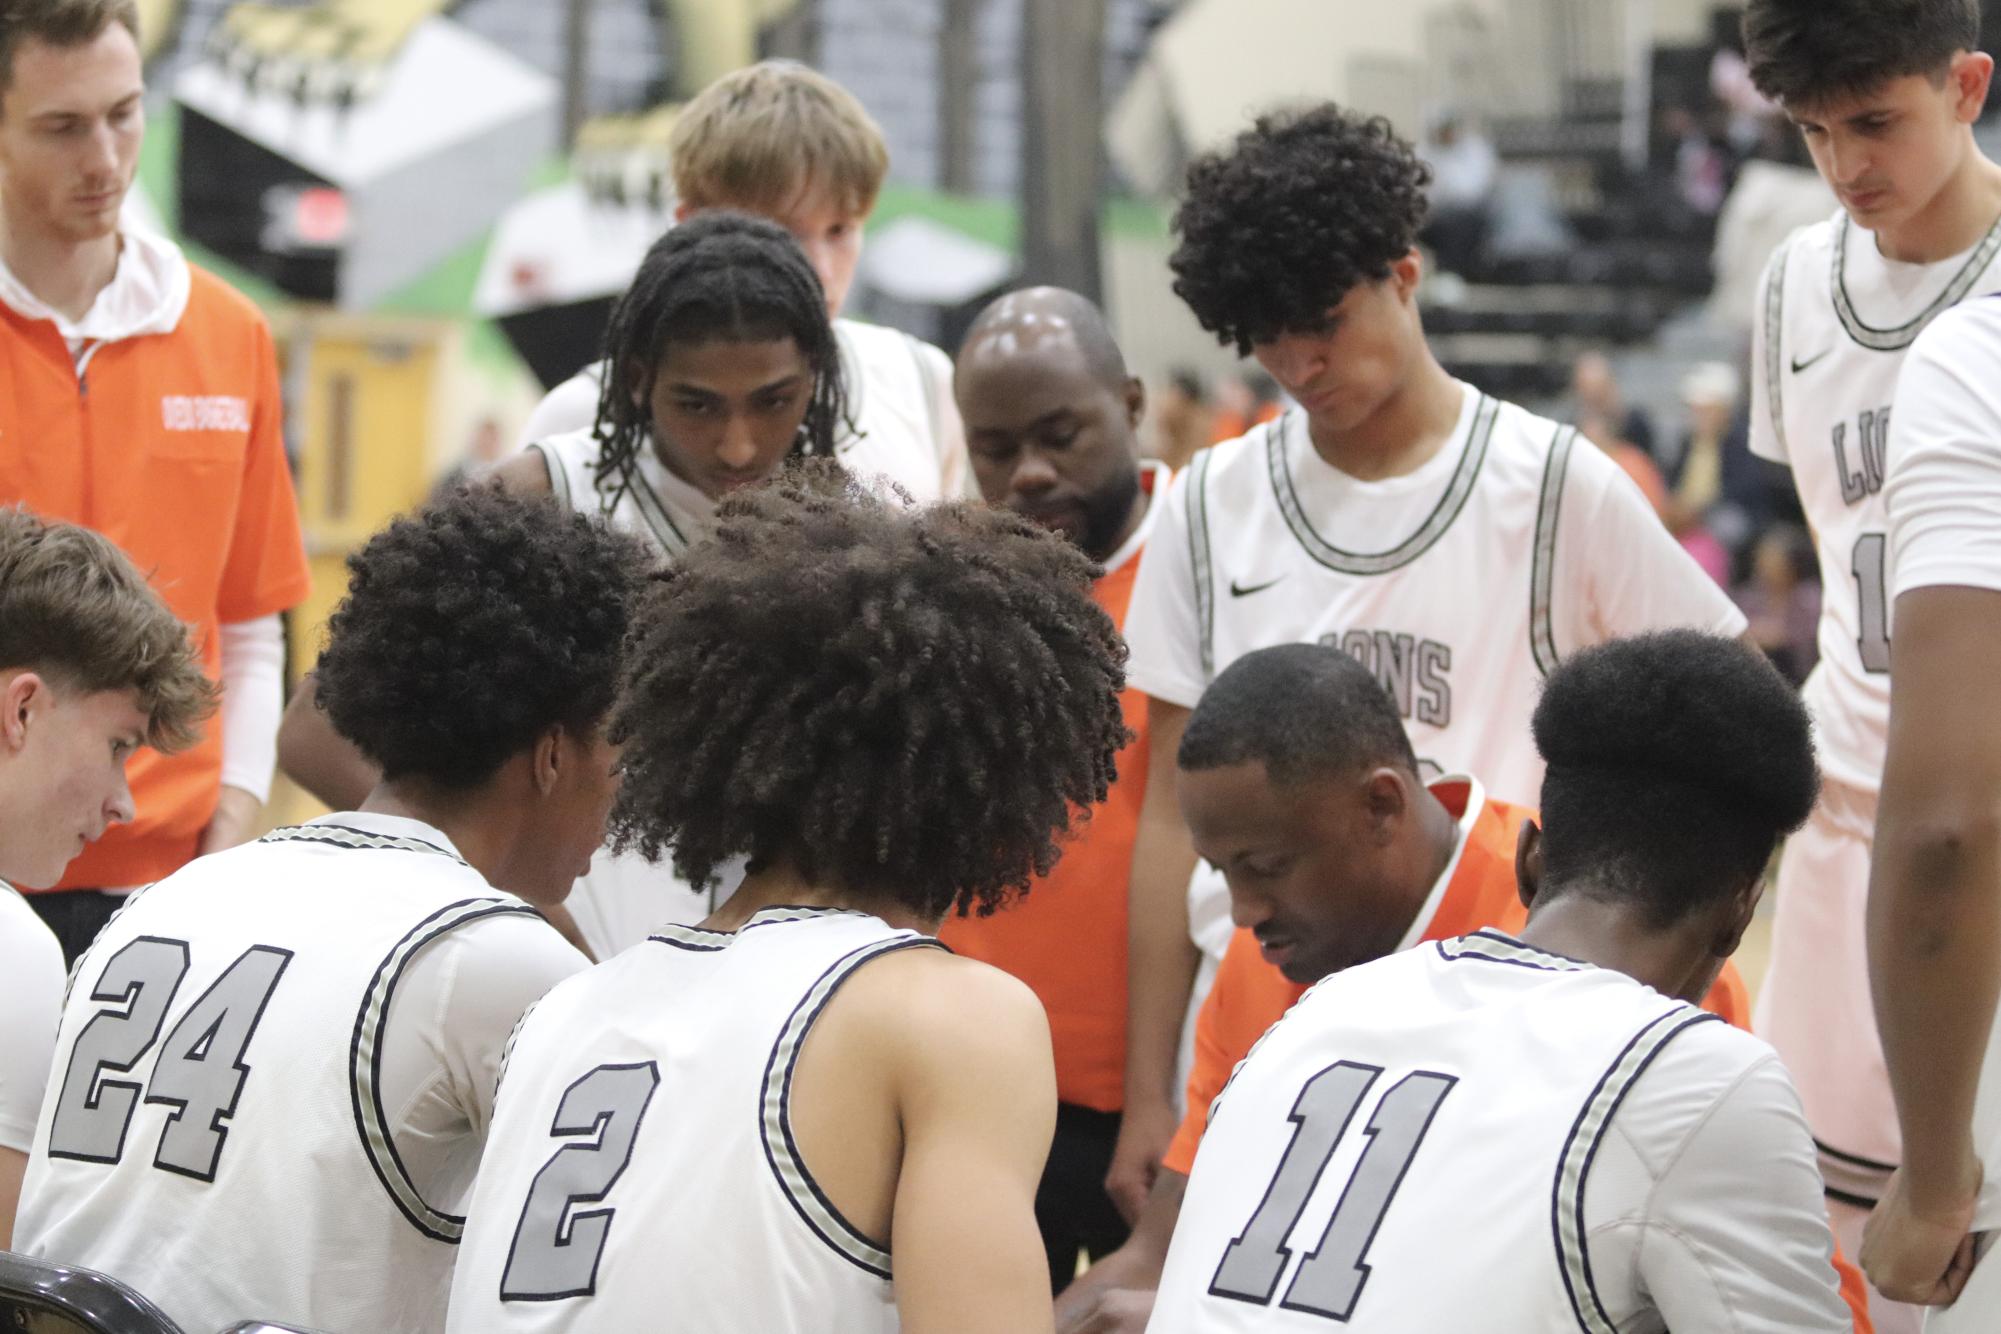 Oviedo Boys Basketball Team Thrives Under New Coach and Standout Players